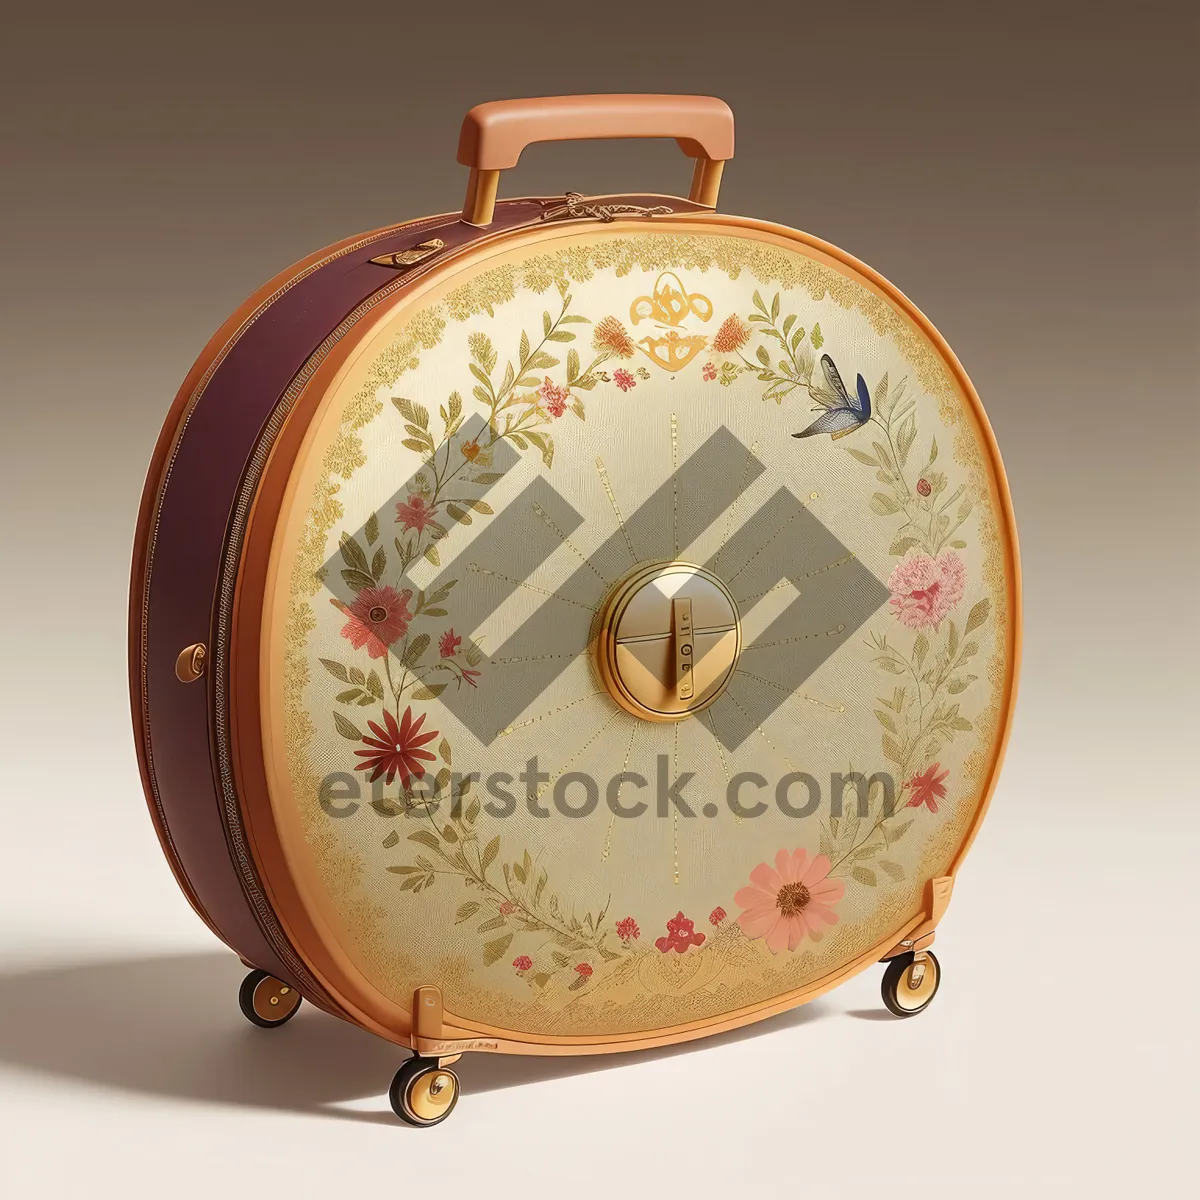 Picture of Vintage Alarm Clock for Timekeeping and Celebrations